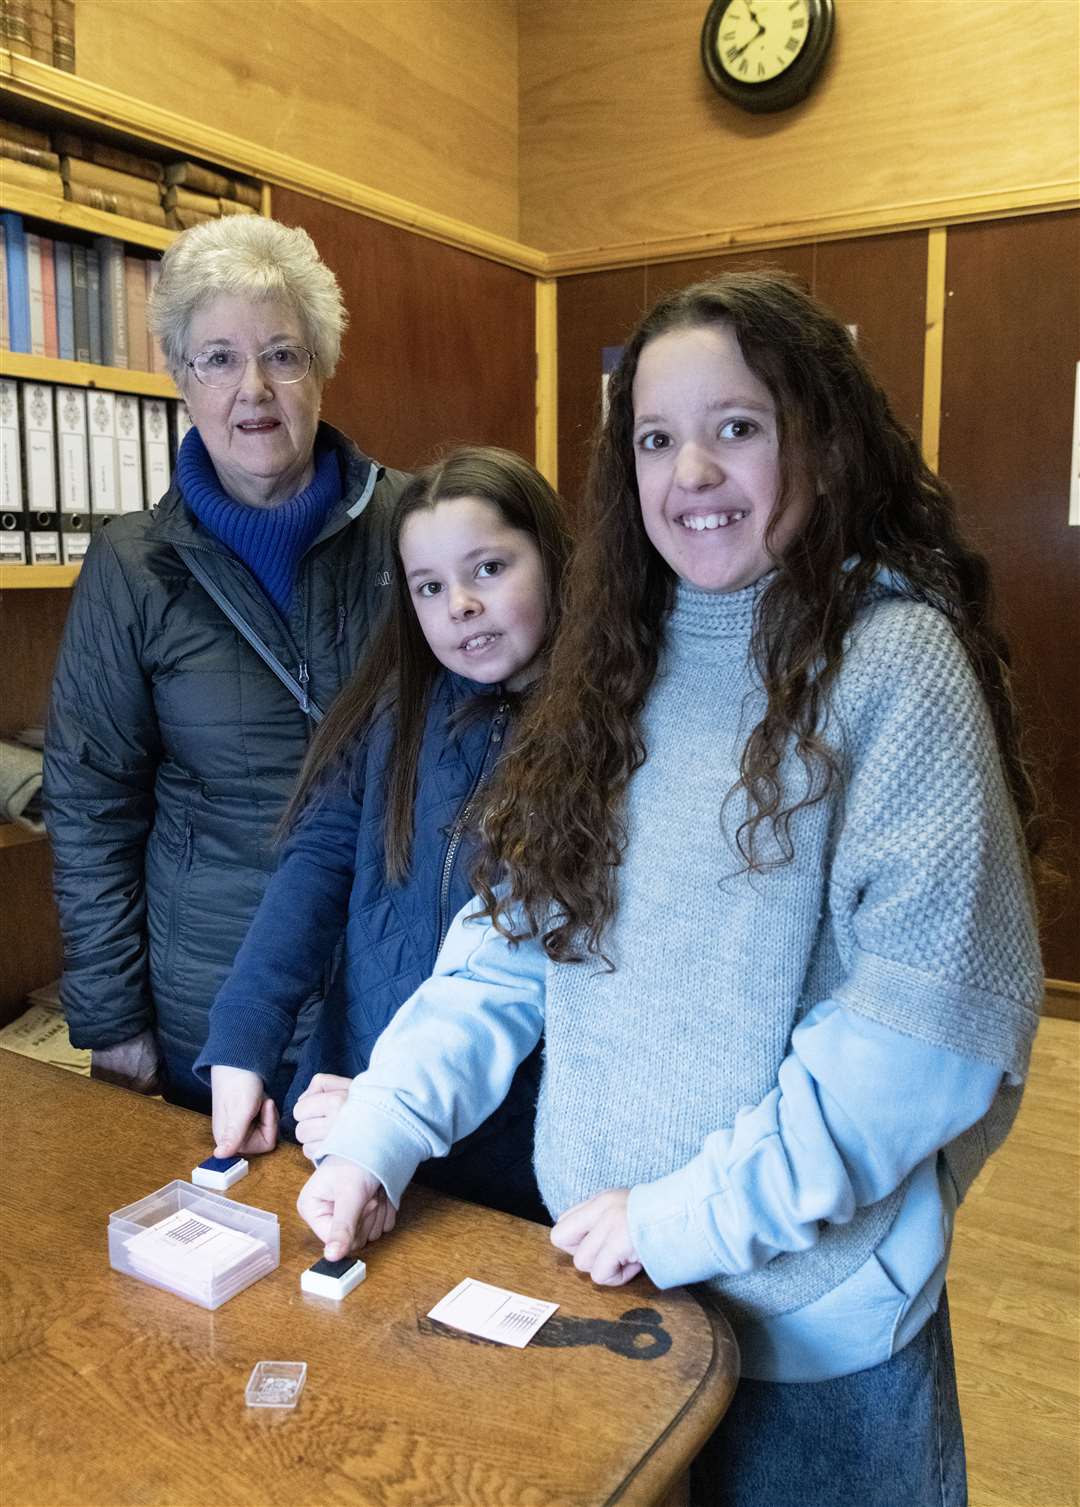 Volunteer Susie Haworth taking Laura and Lucy Hislop's fingerprints in the Tolbooth.